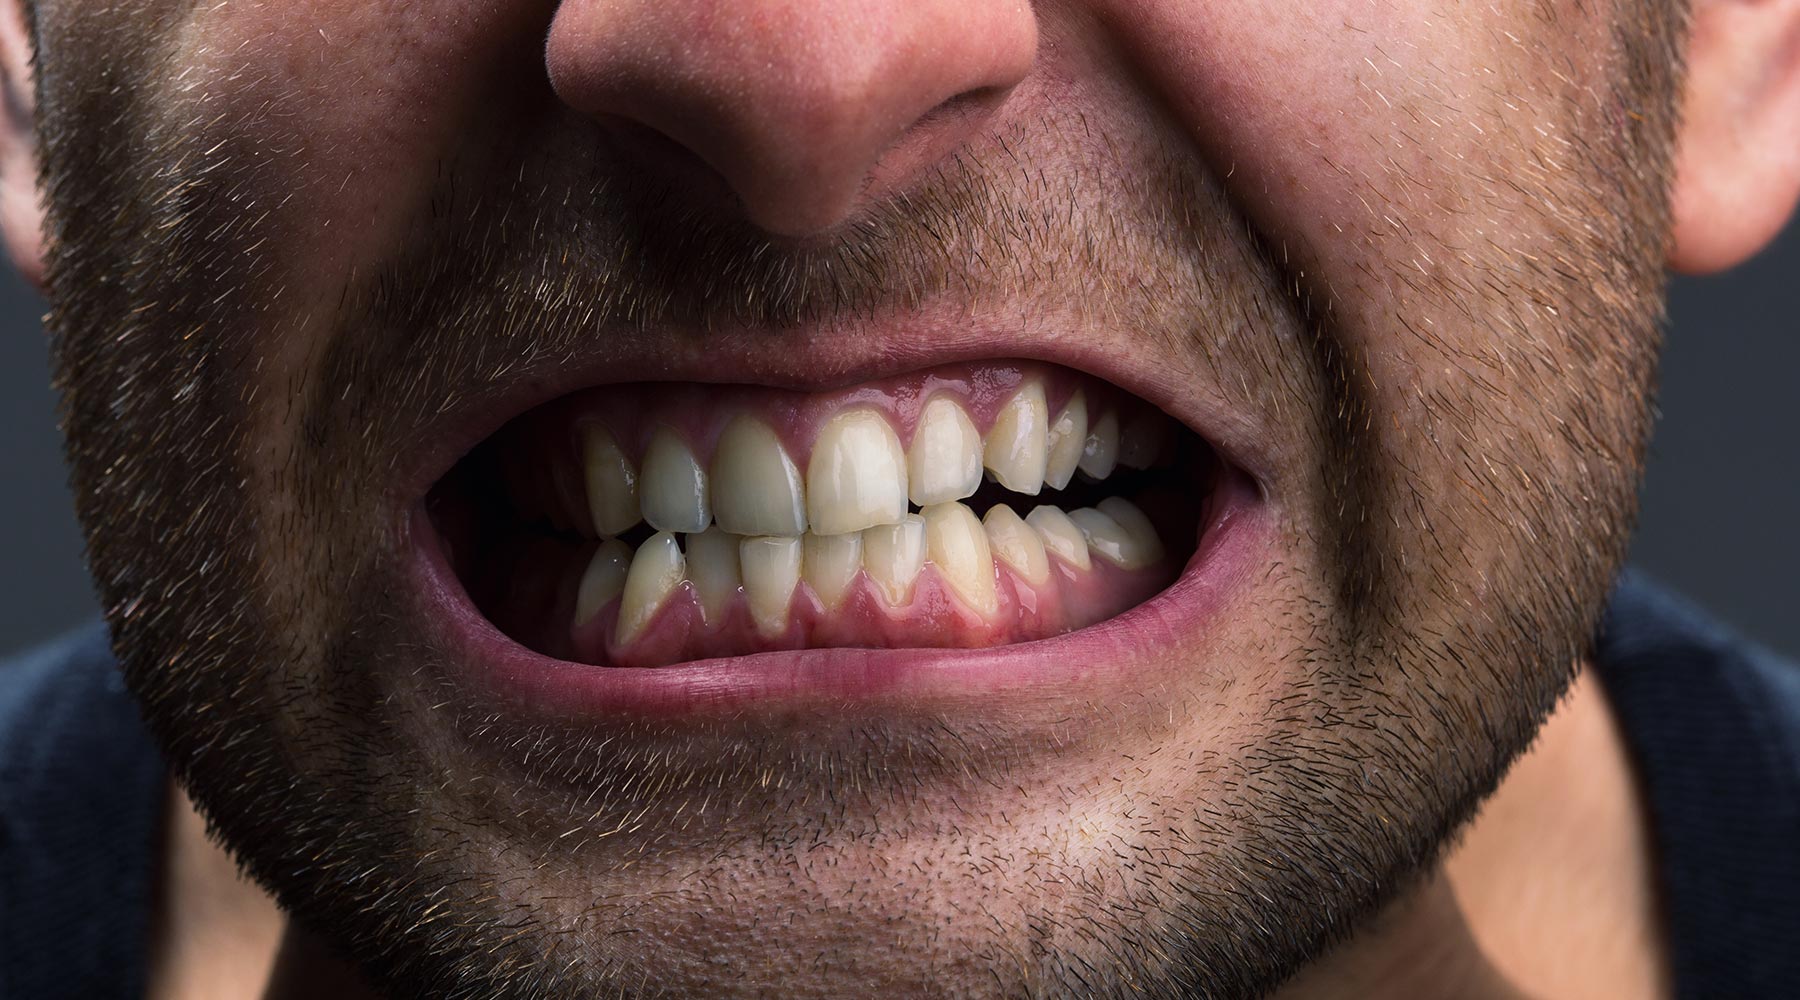 Protect your teeth from grinding (bruxism)